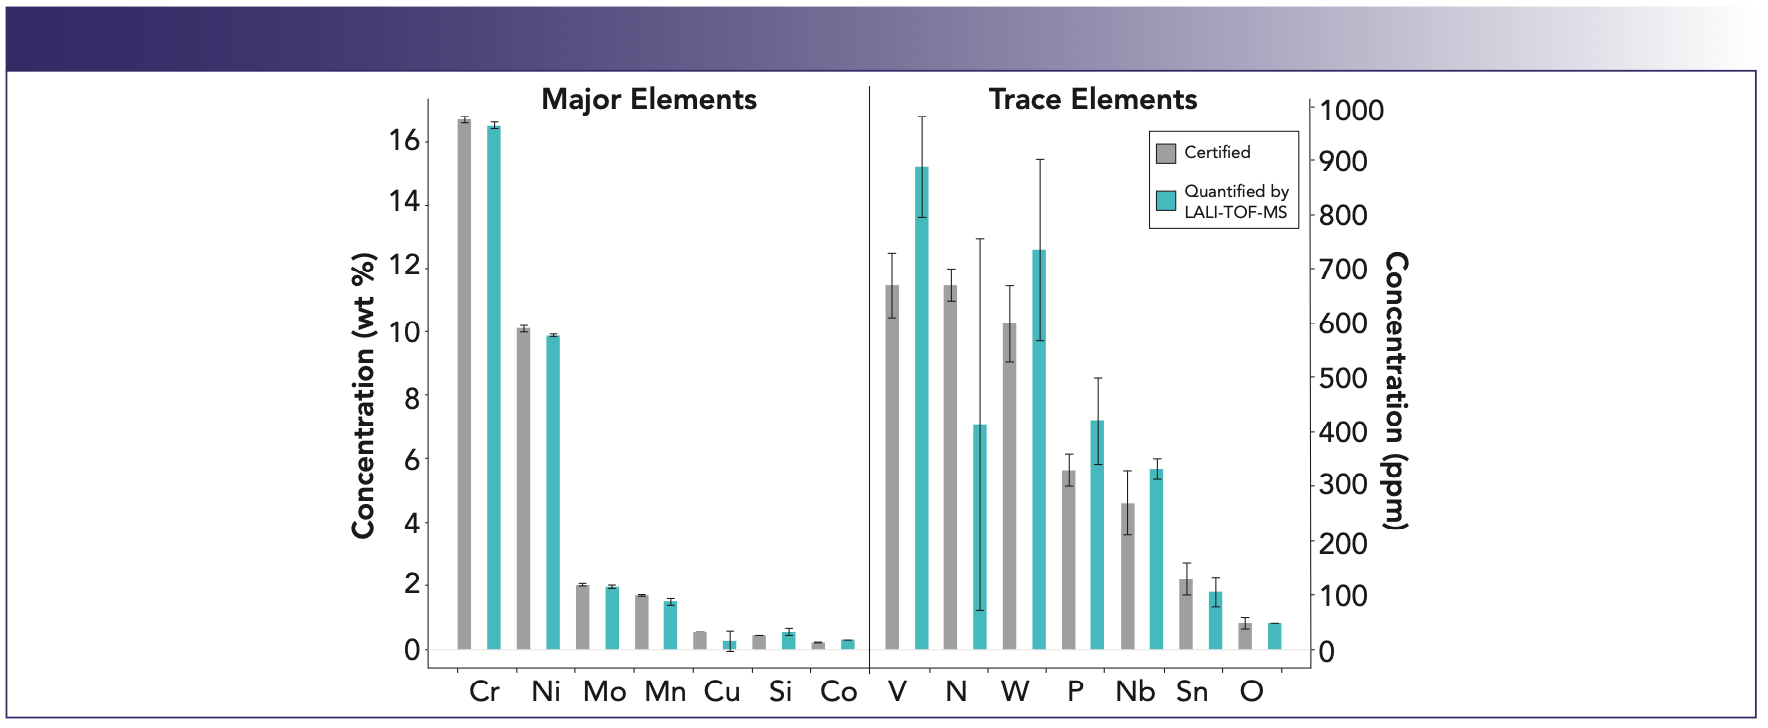 FIGURE 5: Results from treating CRM #3 as “unknown” and quantifying its constituents from calibration curves generated by the remaining CRMs. Major element concentrations are represented in wt.% and those of trace elements are in ppm. For each element, the certified value is gray, and the quantified value is blue. Error bars represent the certified values for uncertainties. For the quantified values, uncertainty is calculated using a least squares linear regression of the calibration curves’ points and unknowns.